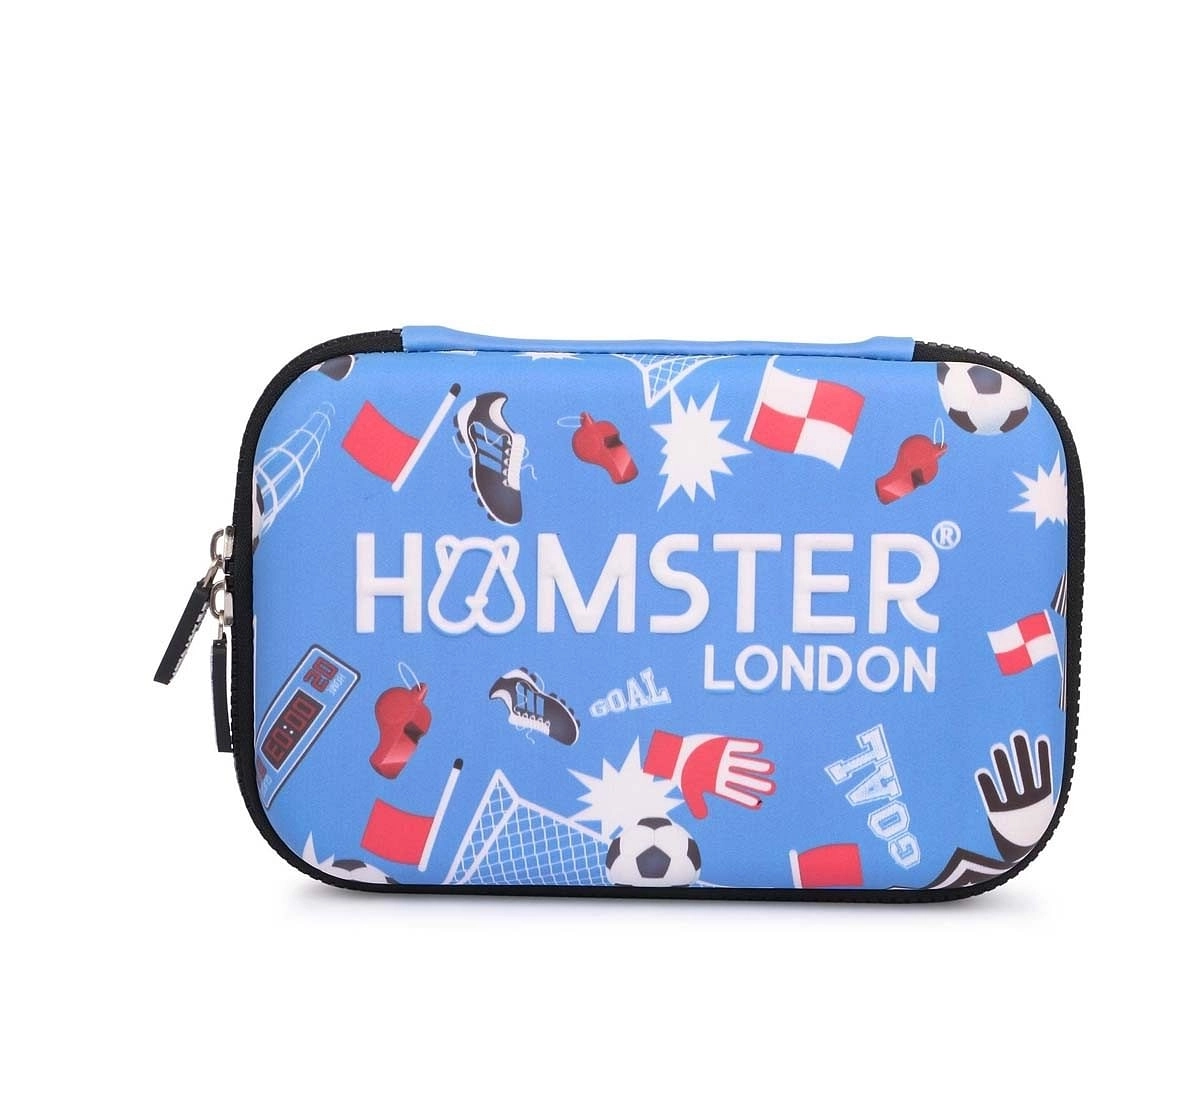 Hamster London Hardcase Football Bags for Kids Age 3Y+ (Blue)